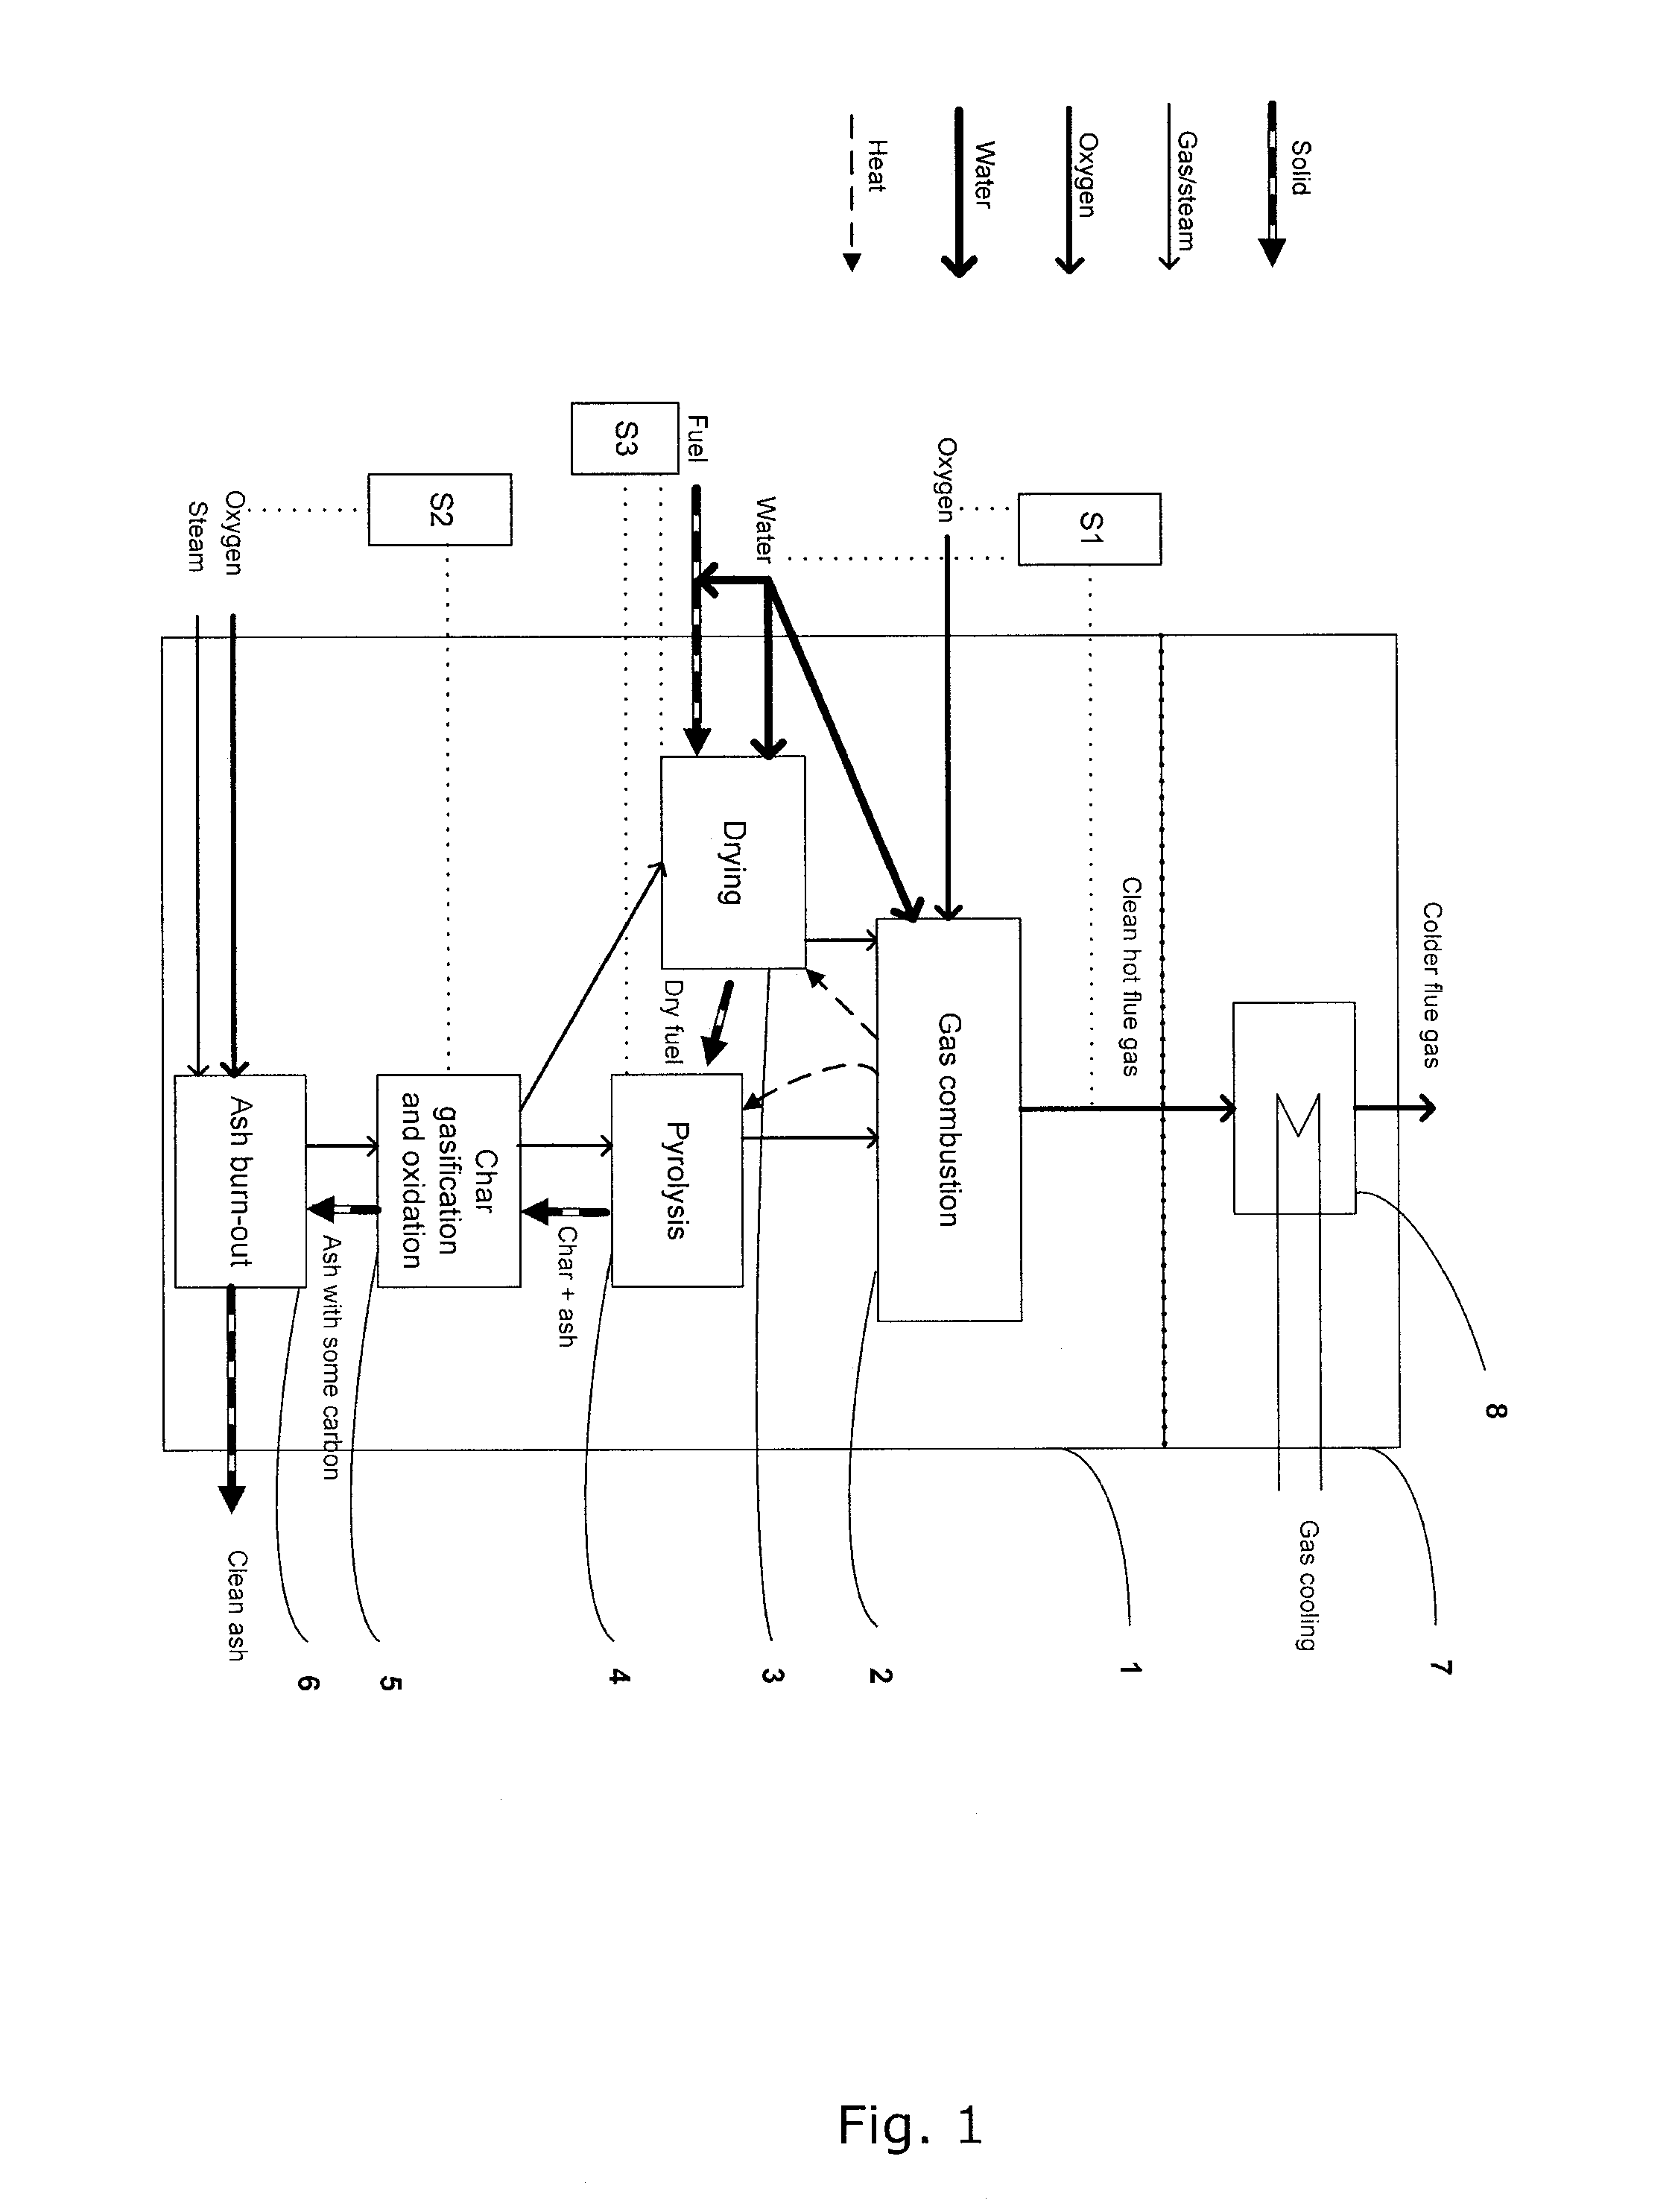 Method and system for production of a clean hot gas based on solid fuels